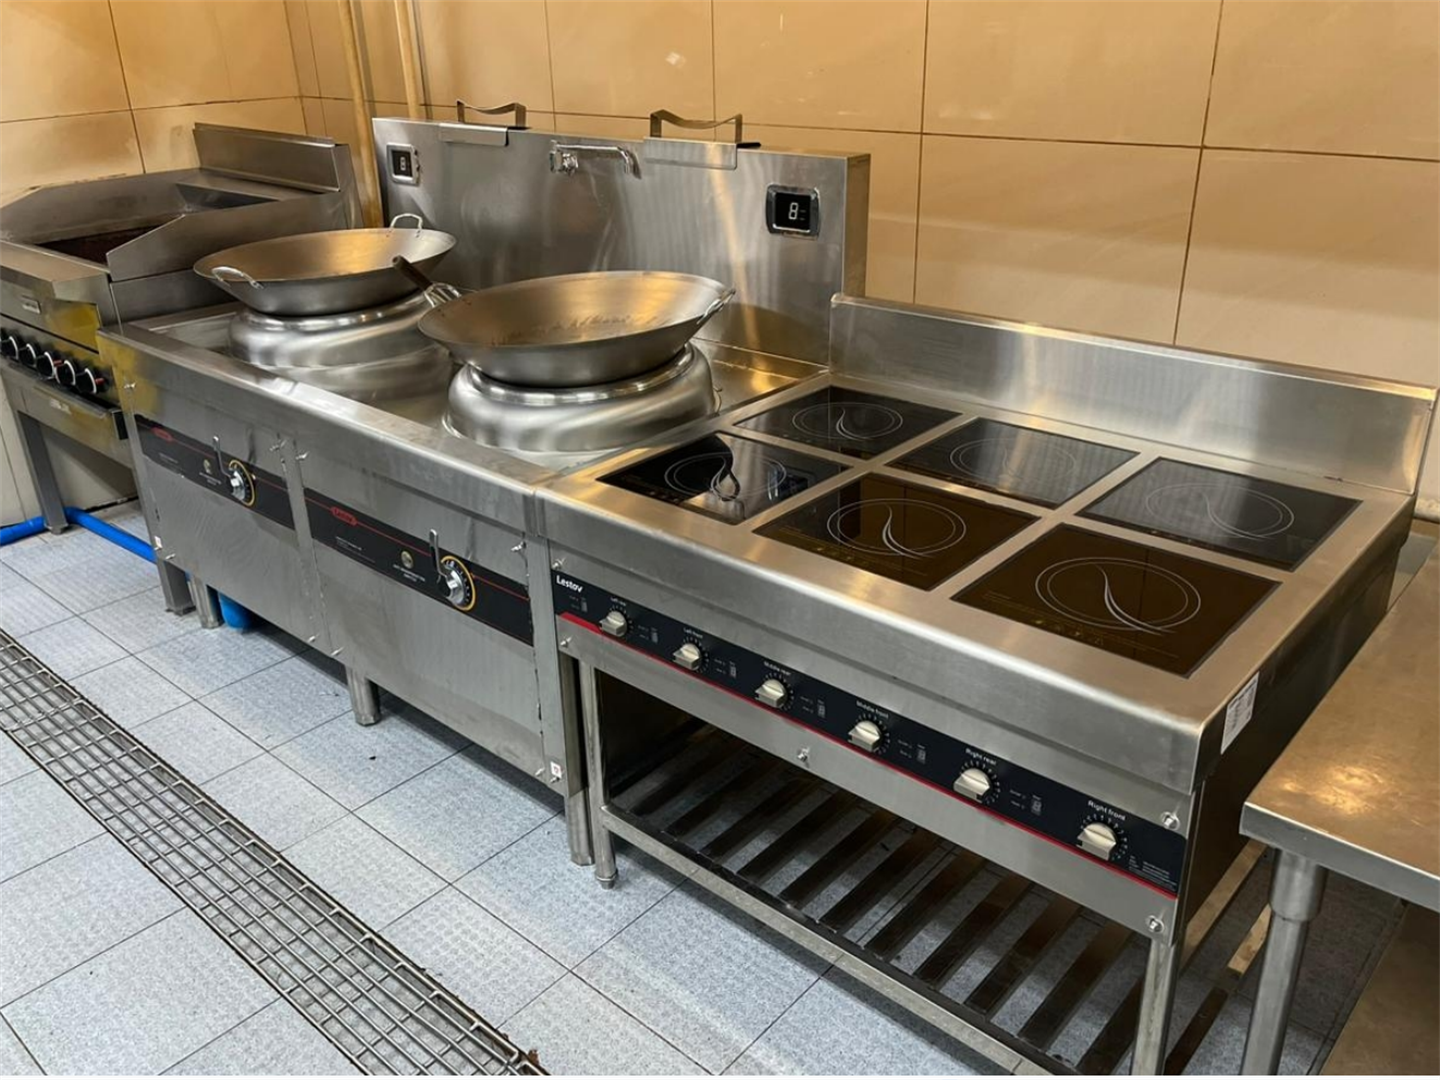 https://leadstov.com/wp-content/uploads/2023/04/The-application-of-Lestov-chinese-commercial-induction-wok-range-6.png